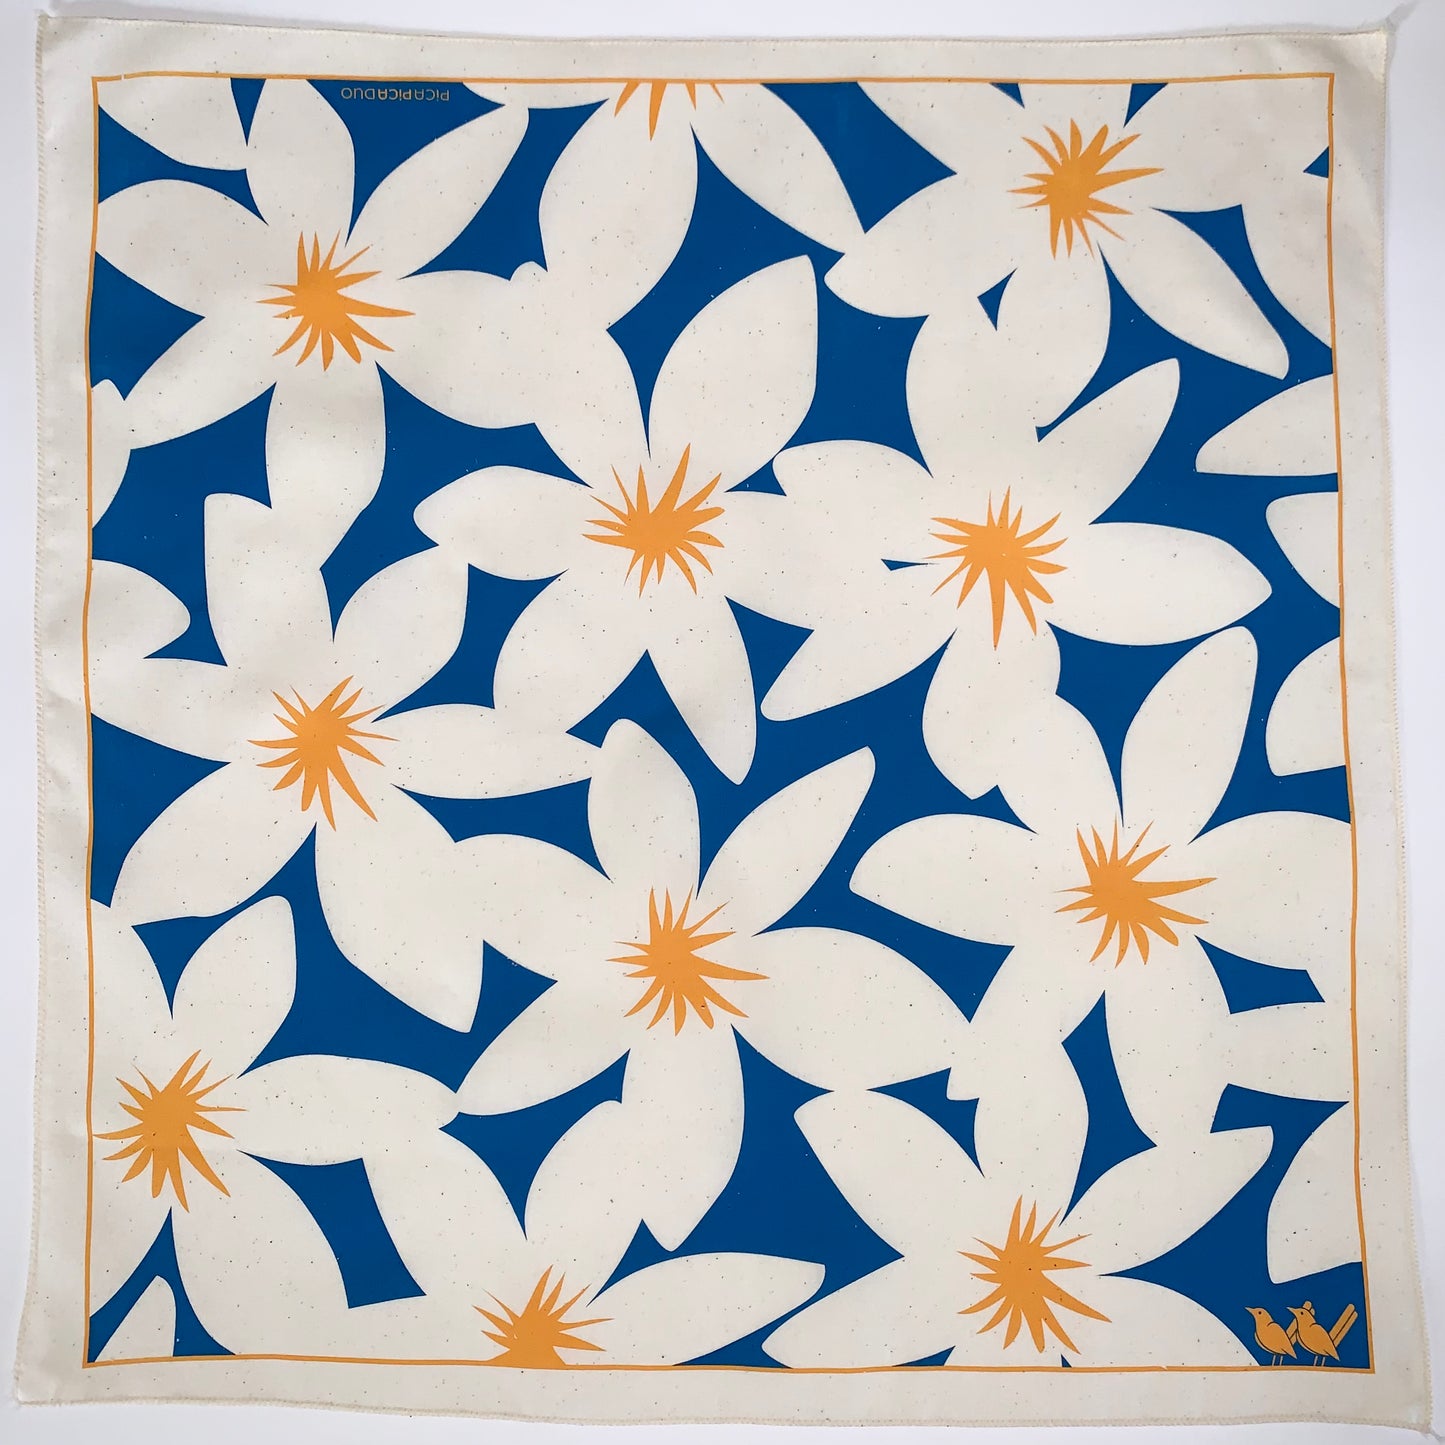 From our Flower Power series, the Florets bandana.